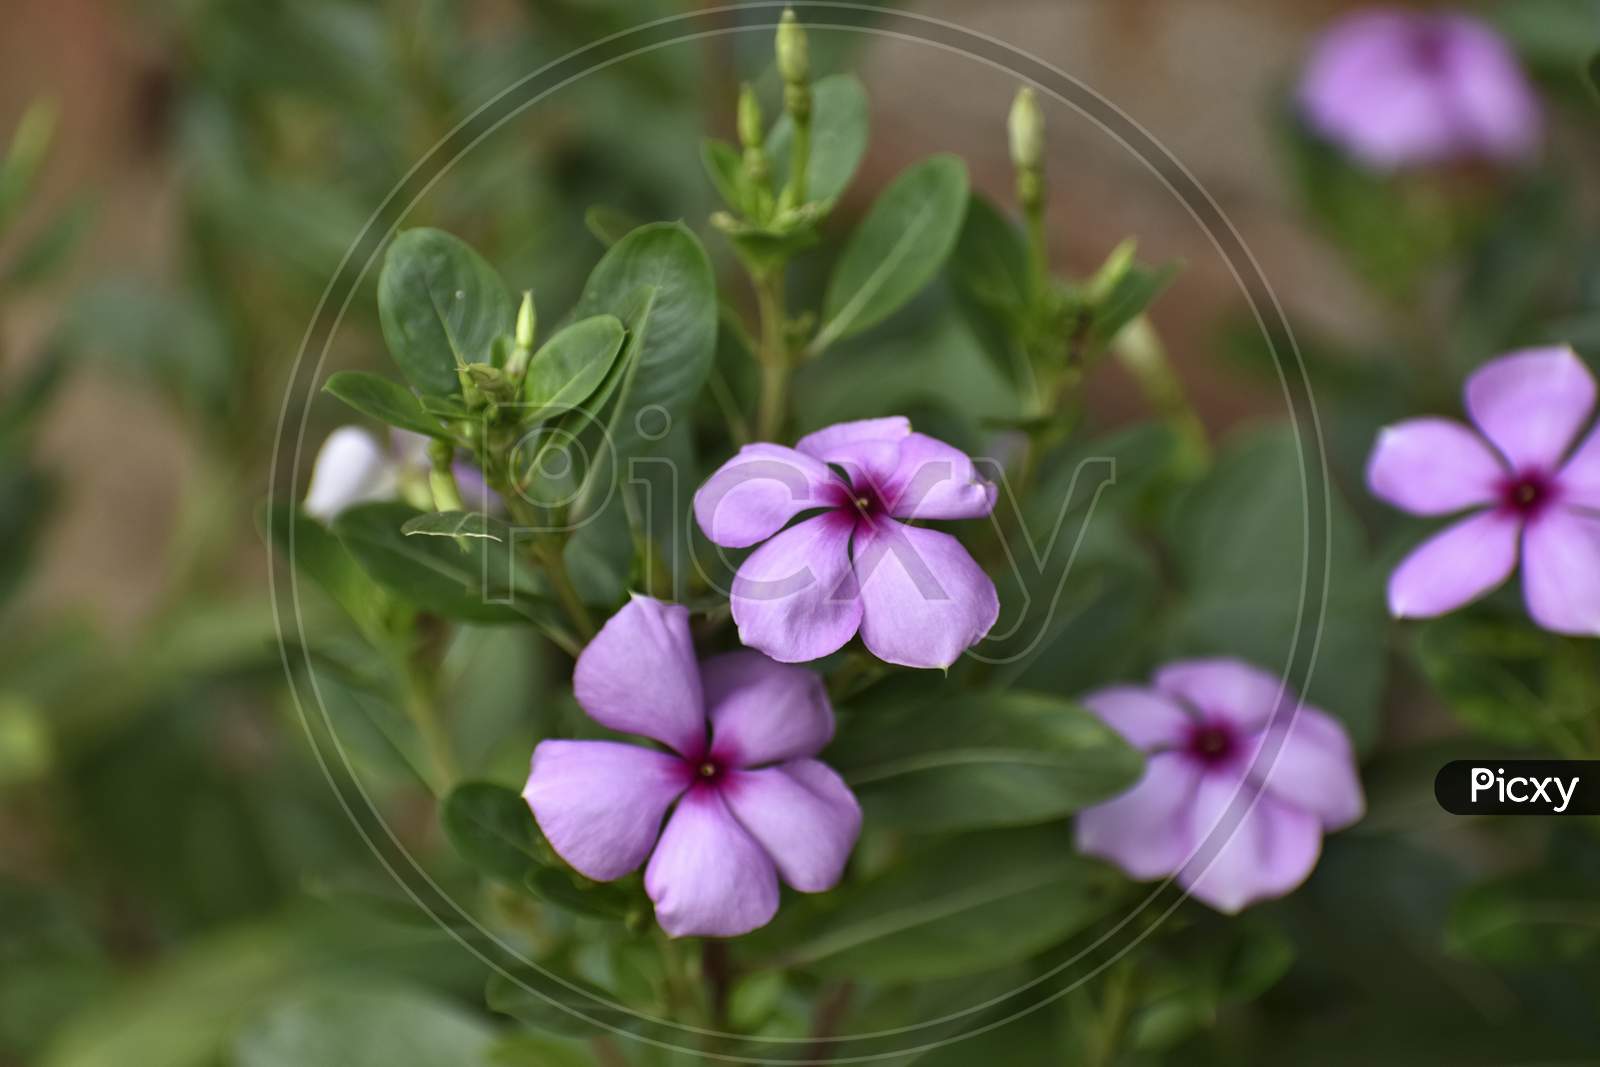 Catharanthus Roseus, Commonly Known As The Madagascar Periwinkle, Rosy Periwinkle, Is A Species Of Flowering Plant In The Dogbane Family Apocynaceae. It Is Native And Endemic To Madagascar